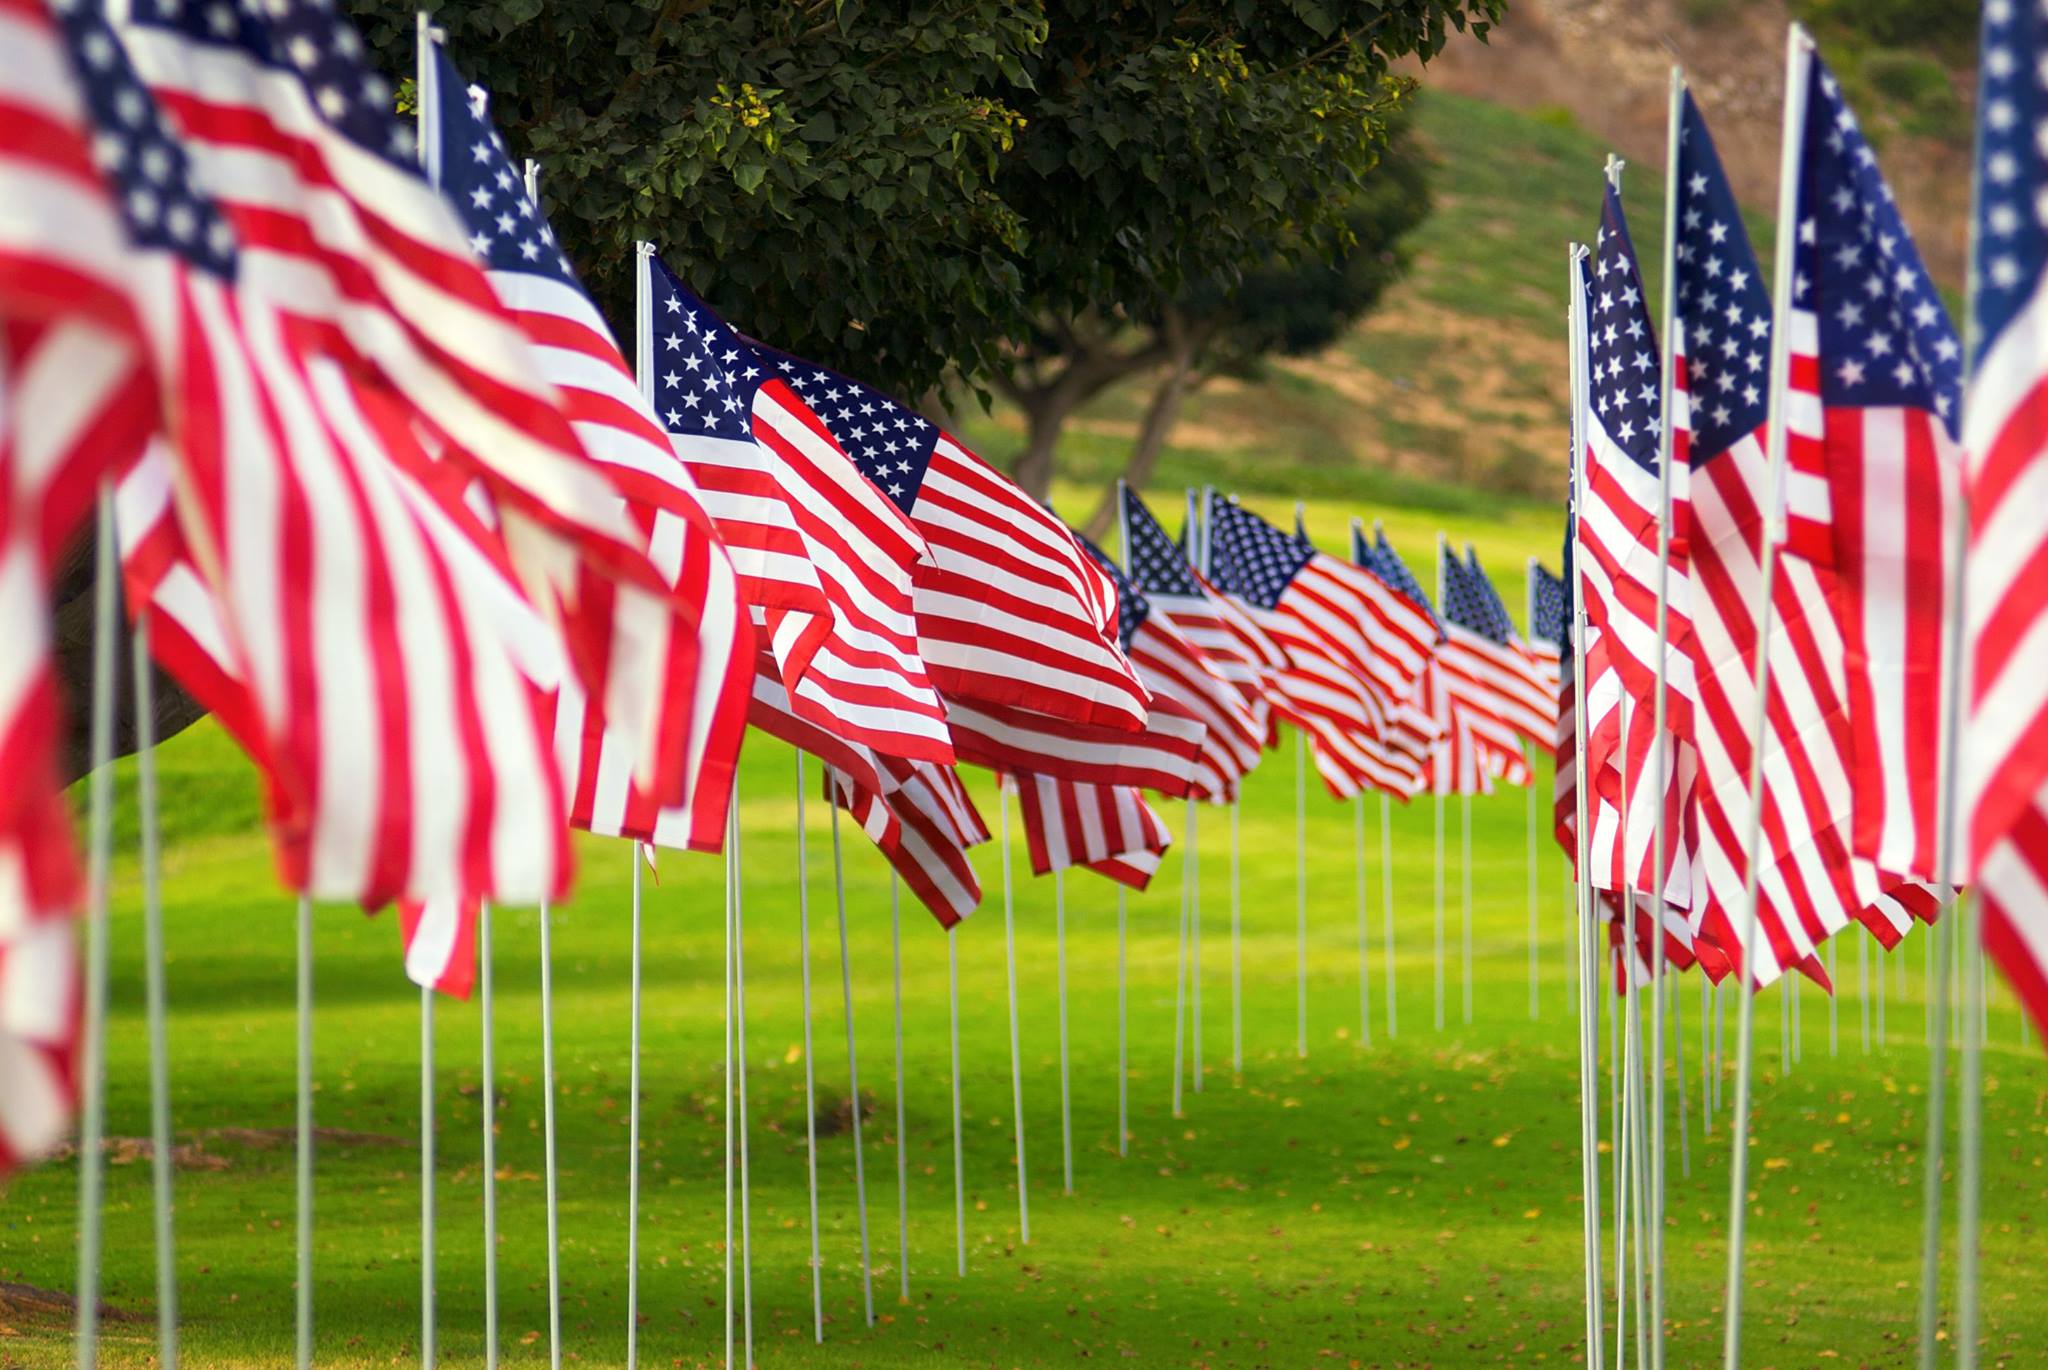 a memorial day with an abundance of American flags